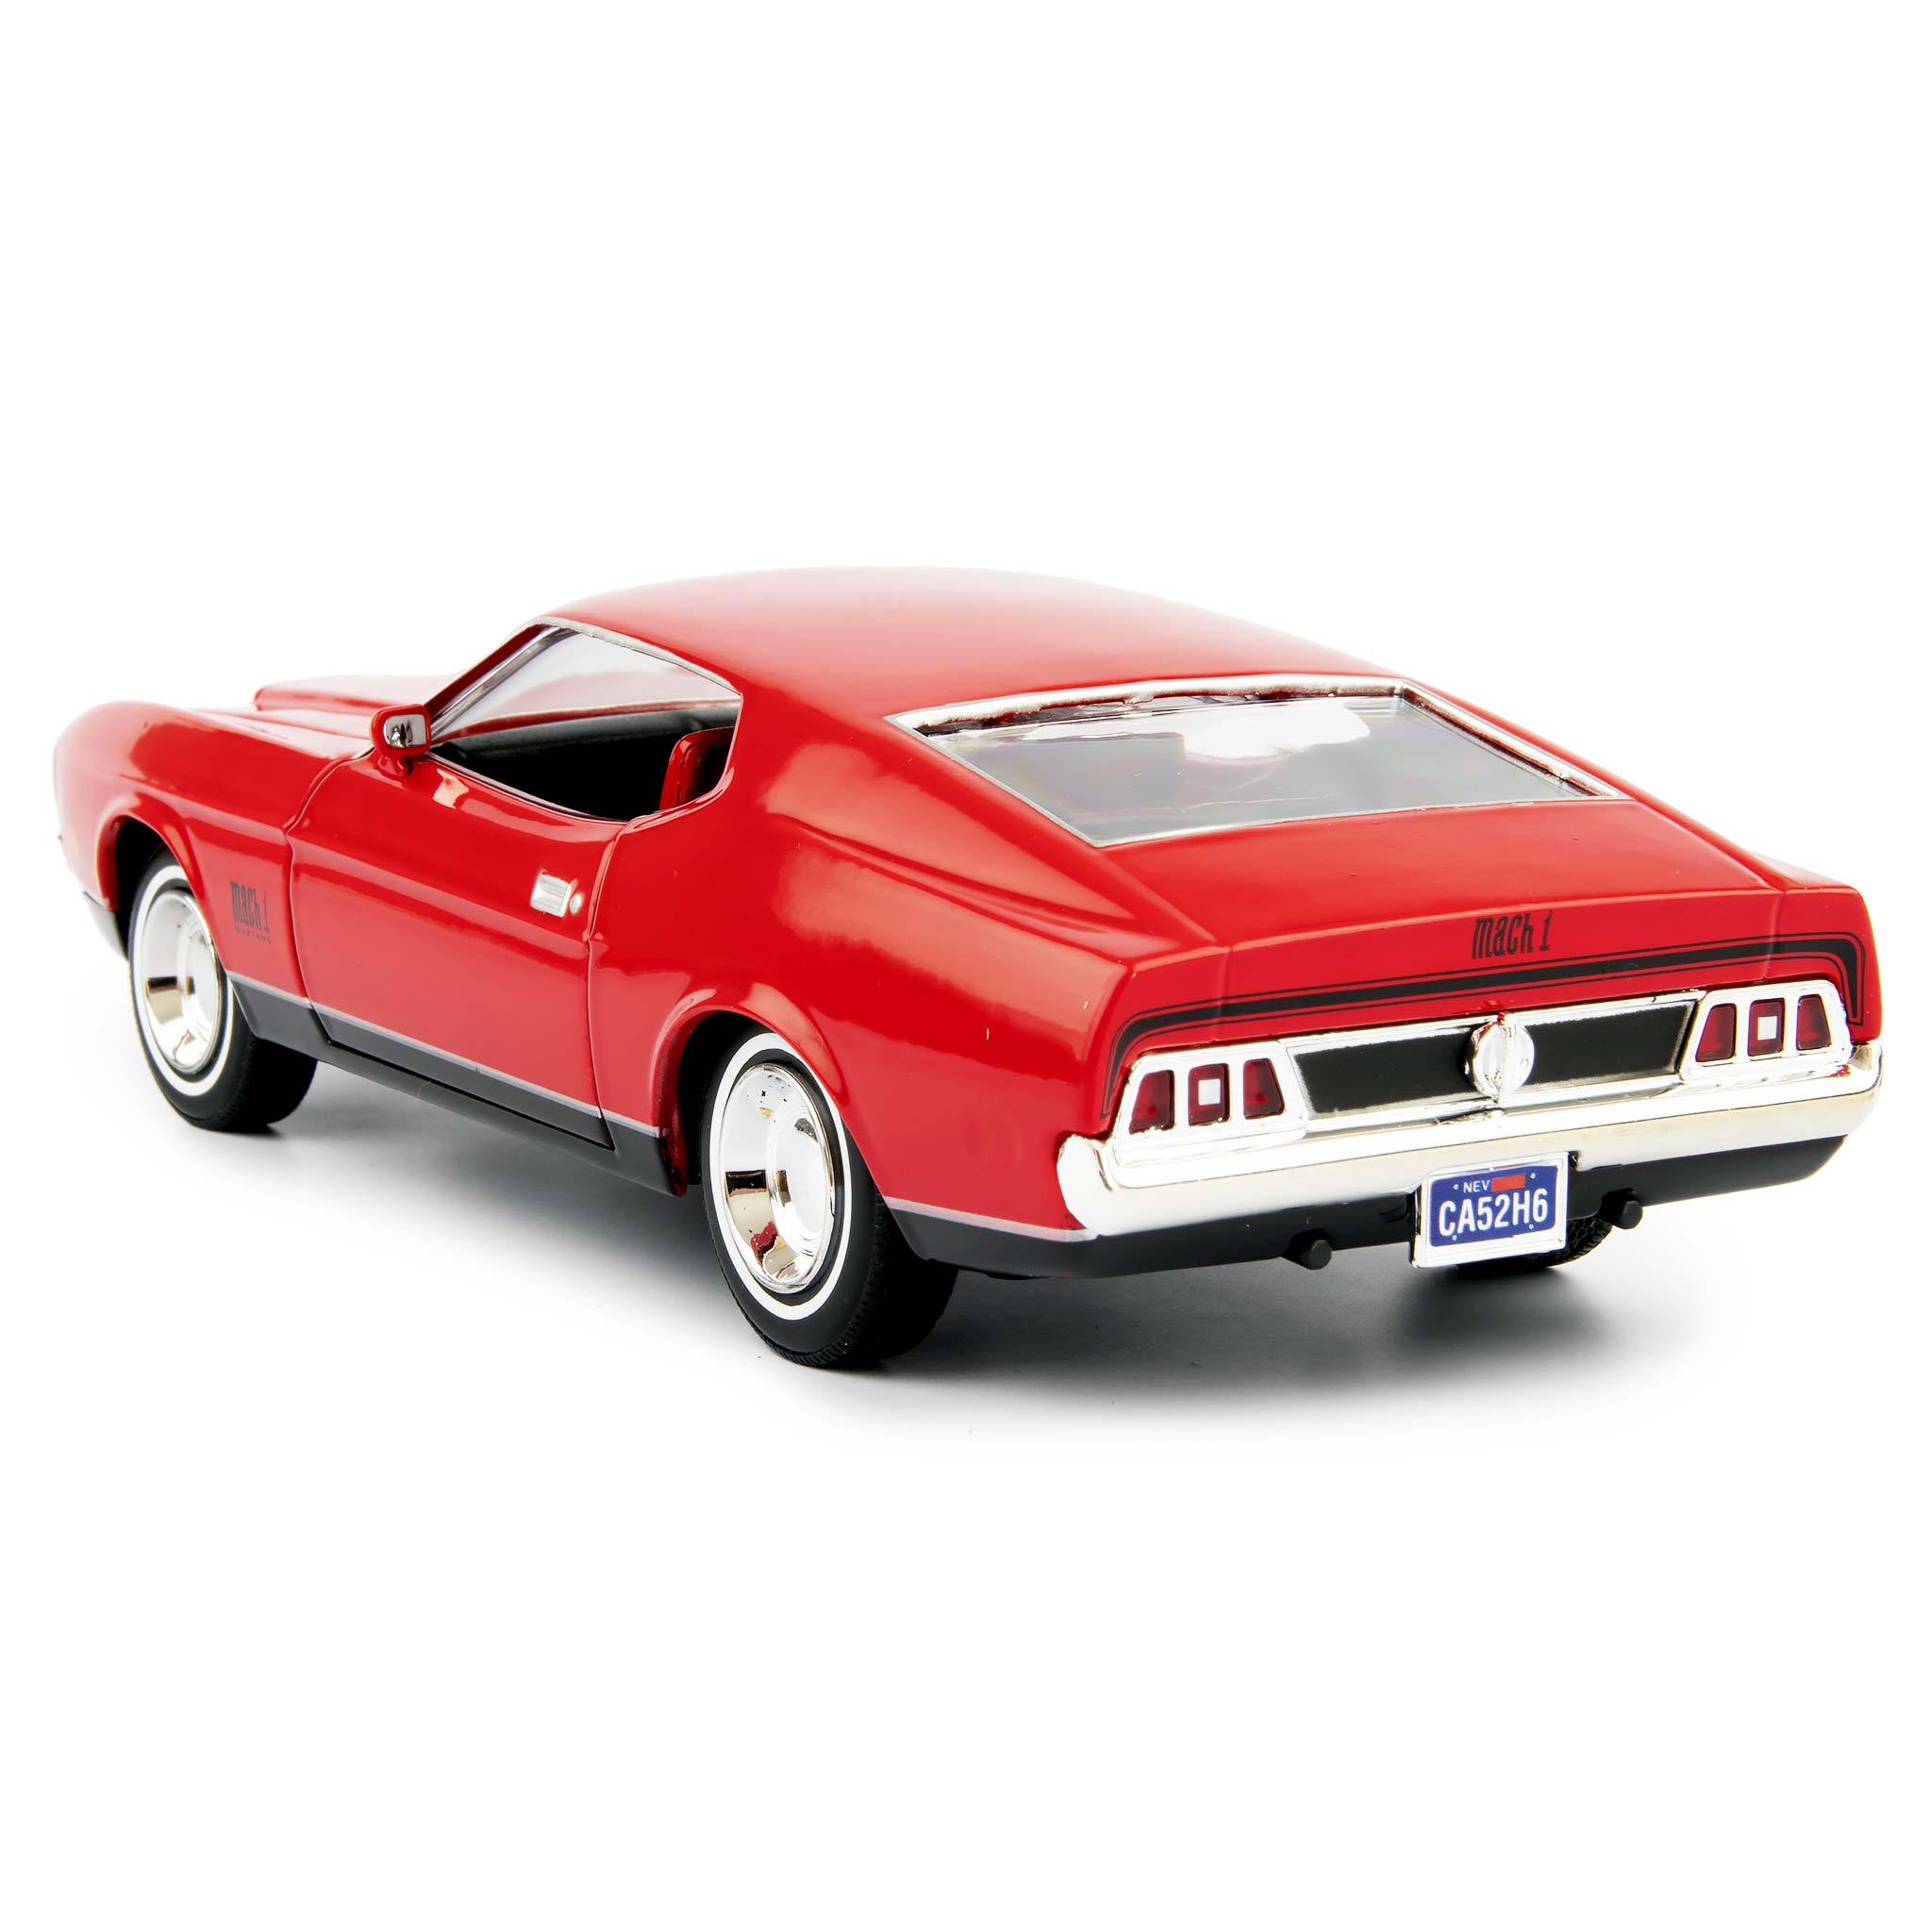 Ford Mustang Mach 1 Diecast Model Car James Bond Diamonds Are Forever - 1:24 Scale